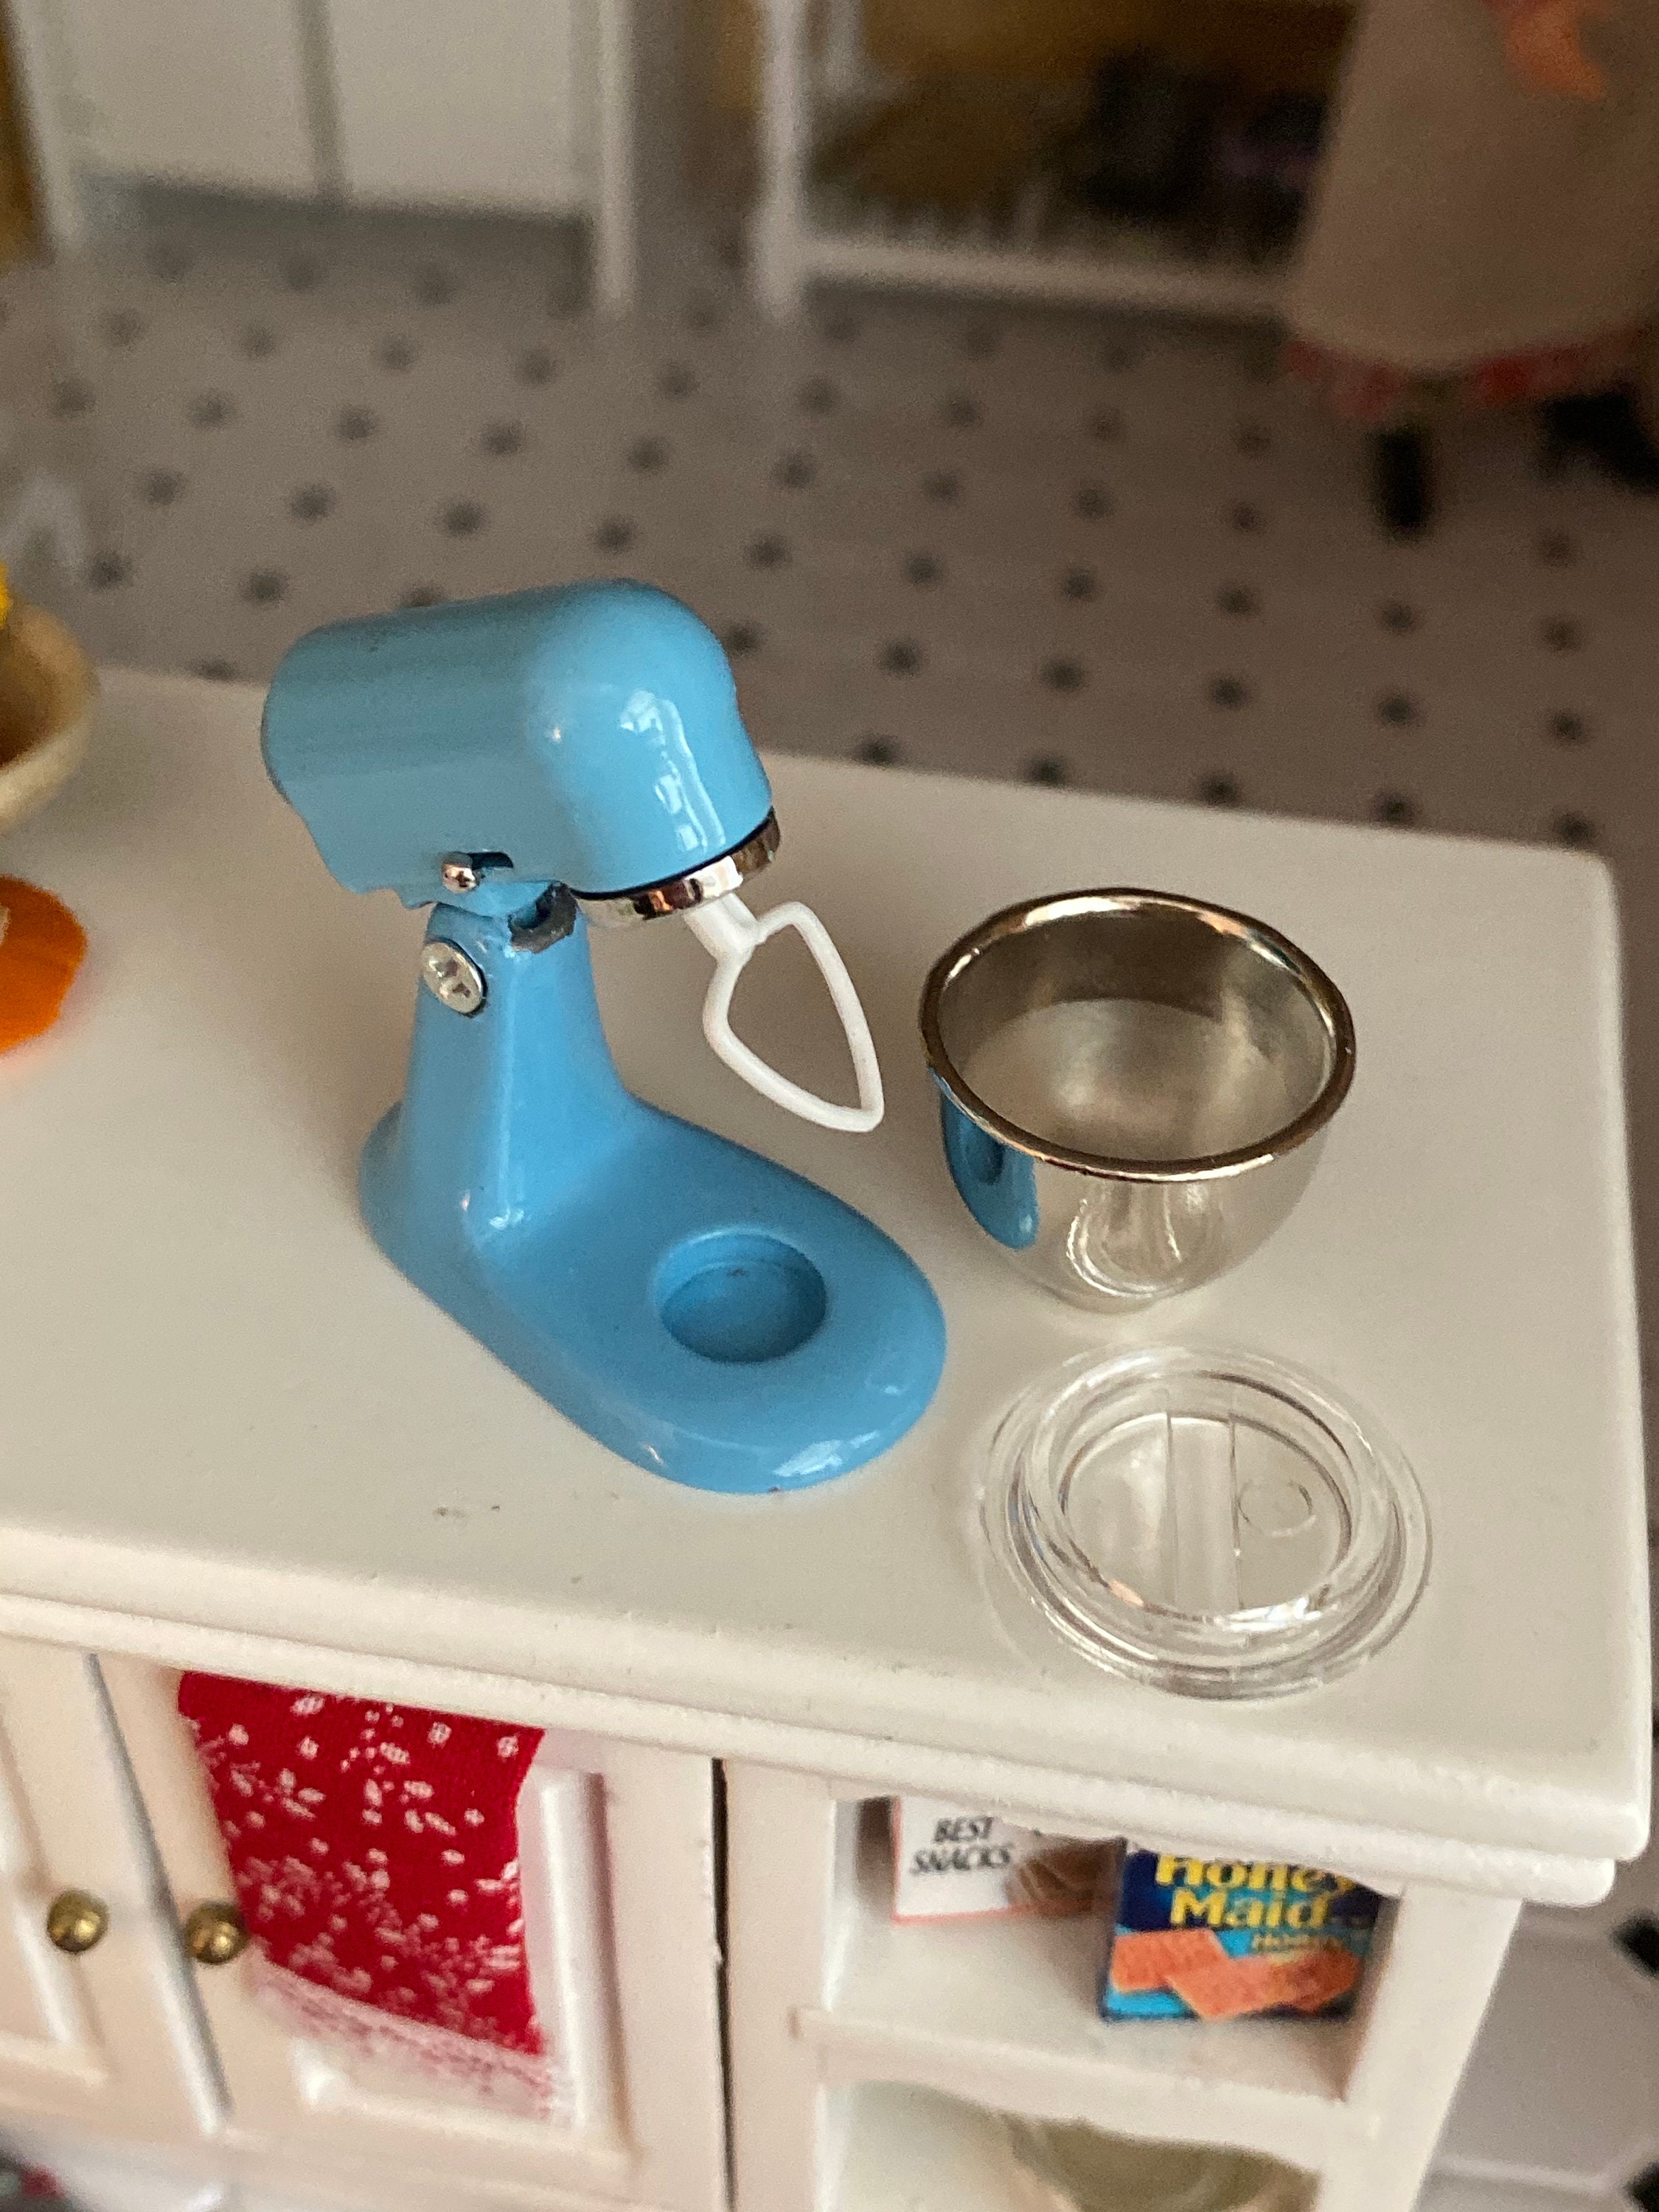 Download Miniature Mixer With Removable Bowl and Spatter Cover, Blue Stand Mixer, Dollhouse Miniature, 1 ...